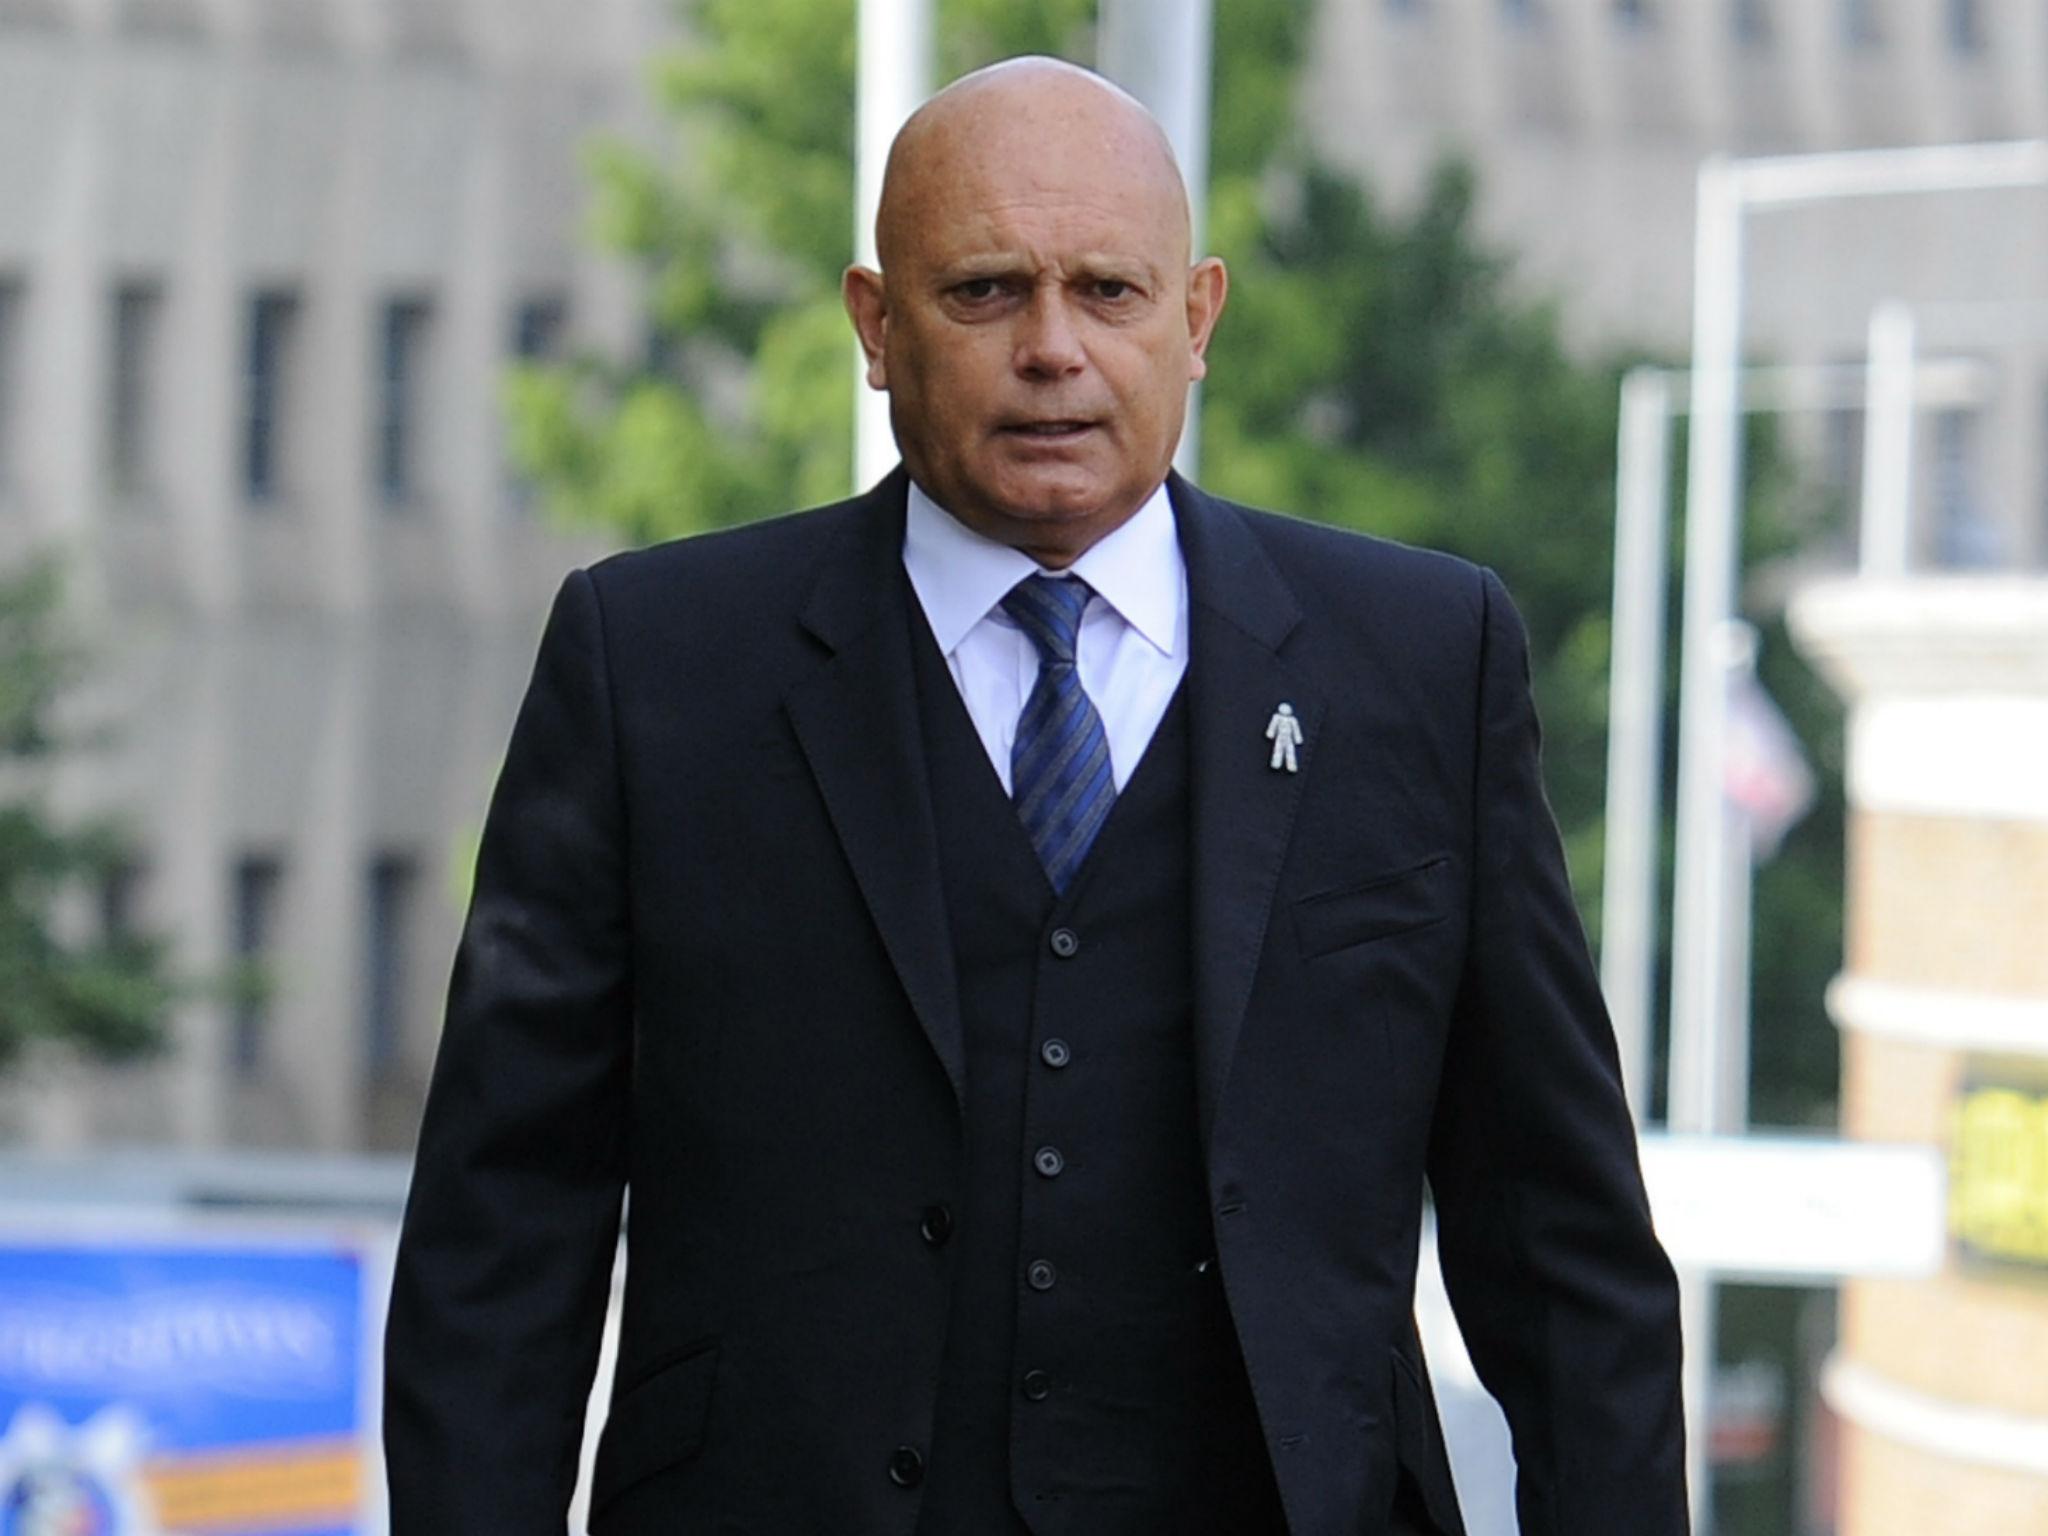 Ray Wilkins has been placed in an induced coma, his wife said.